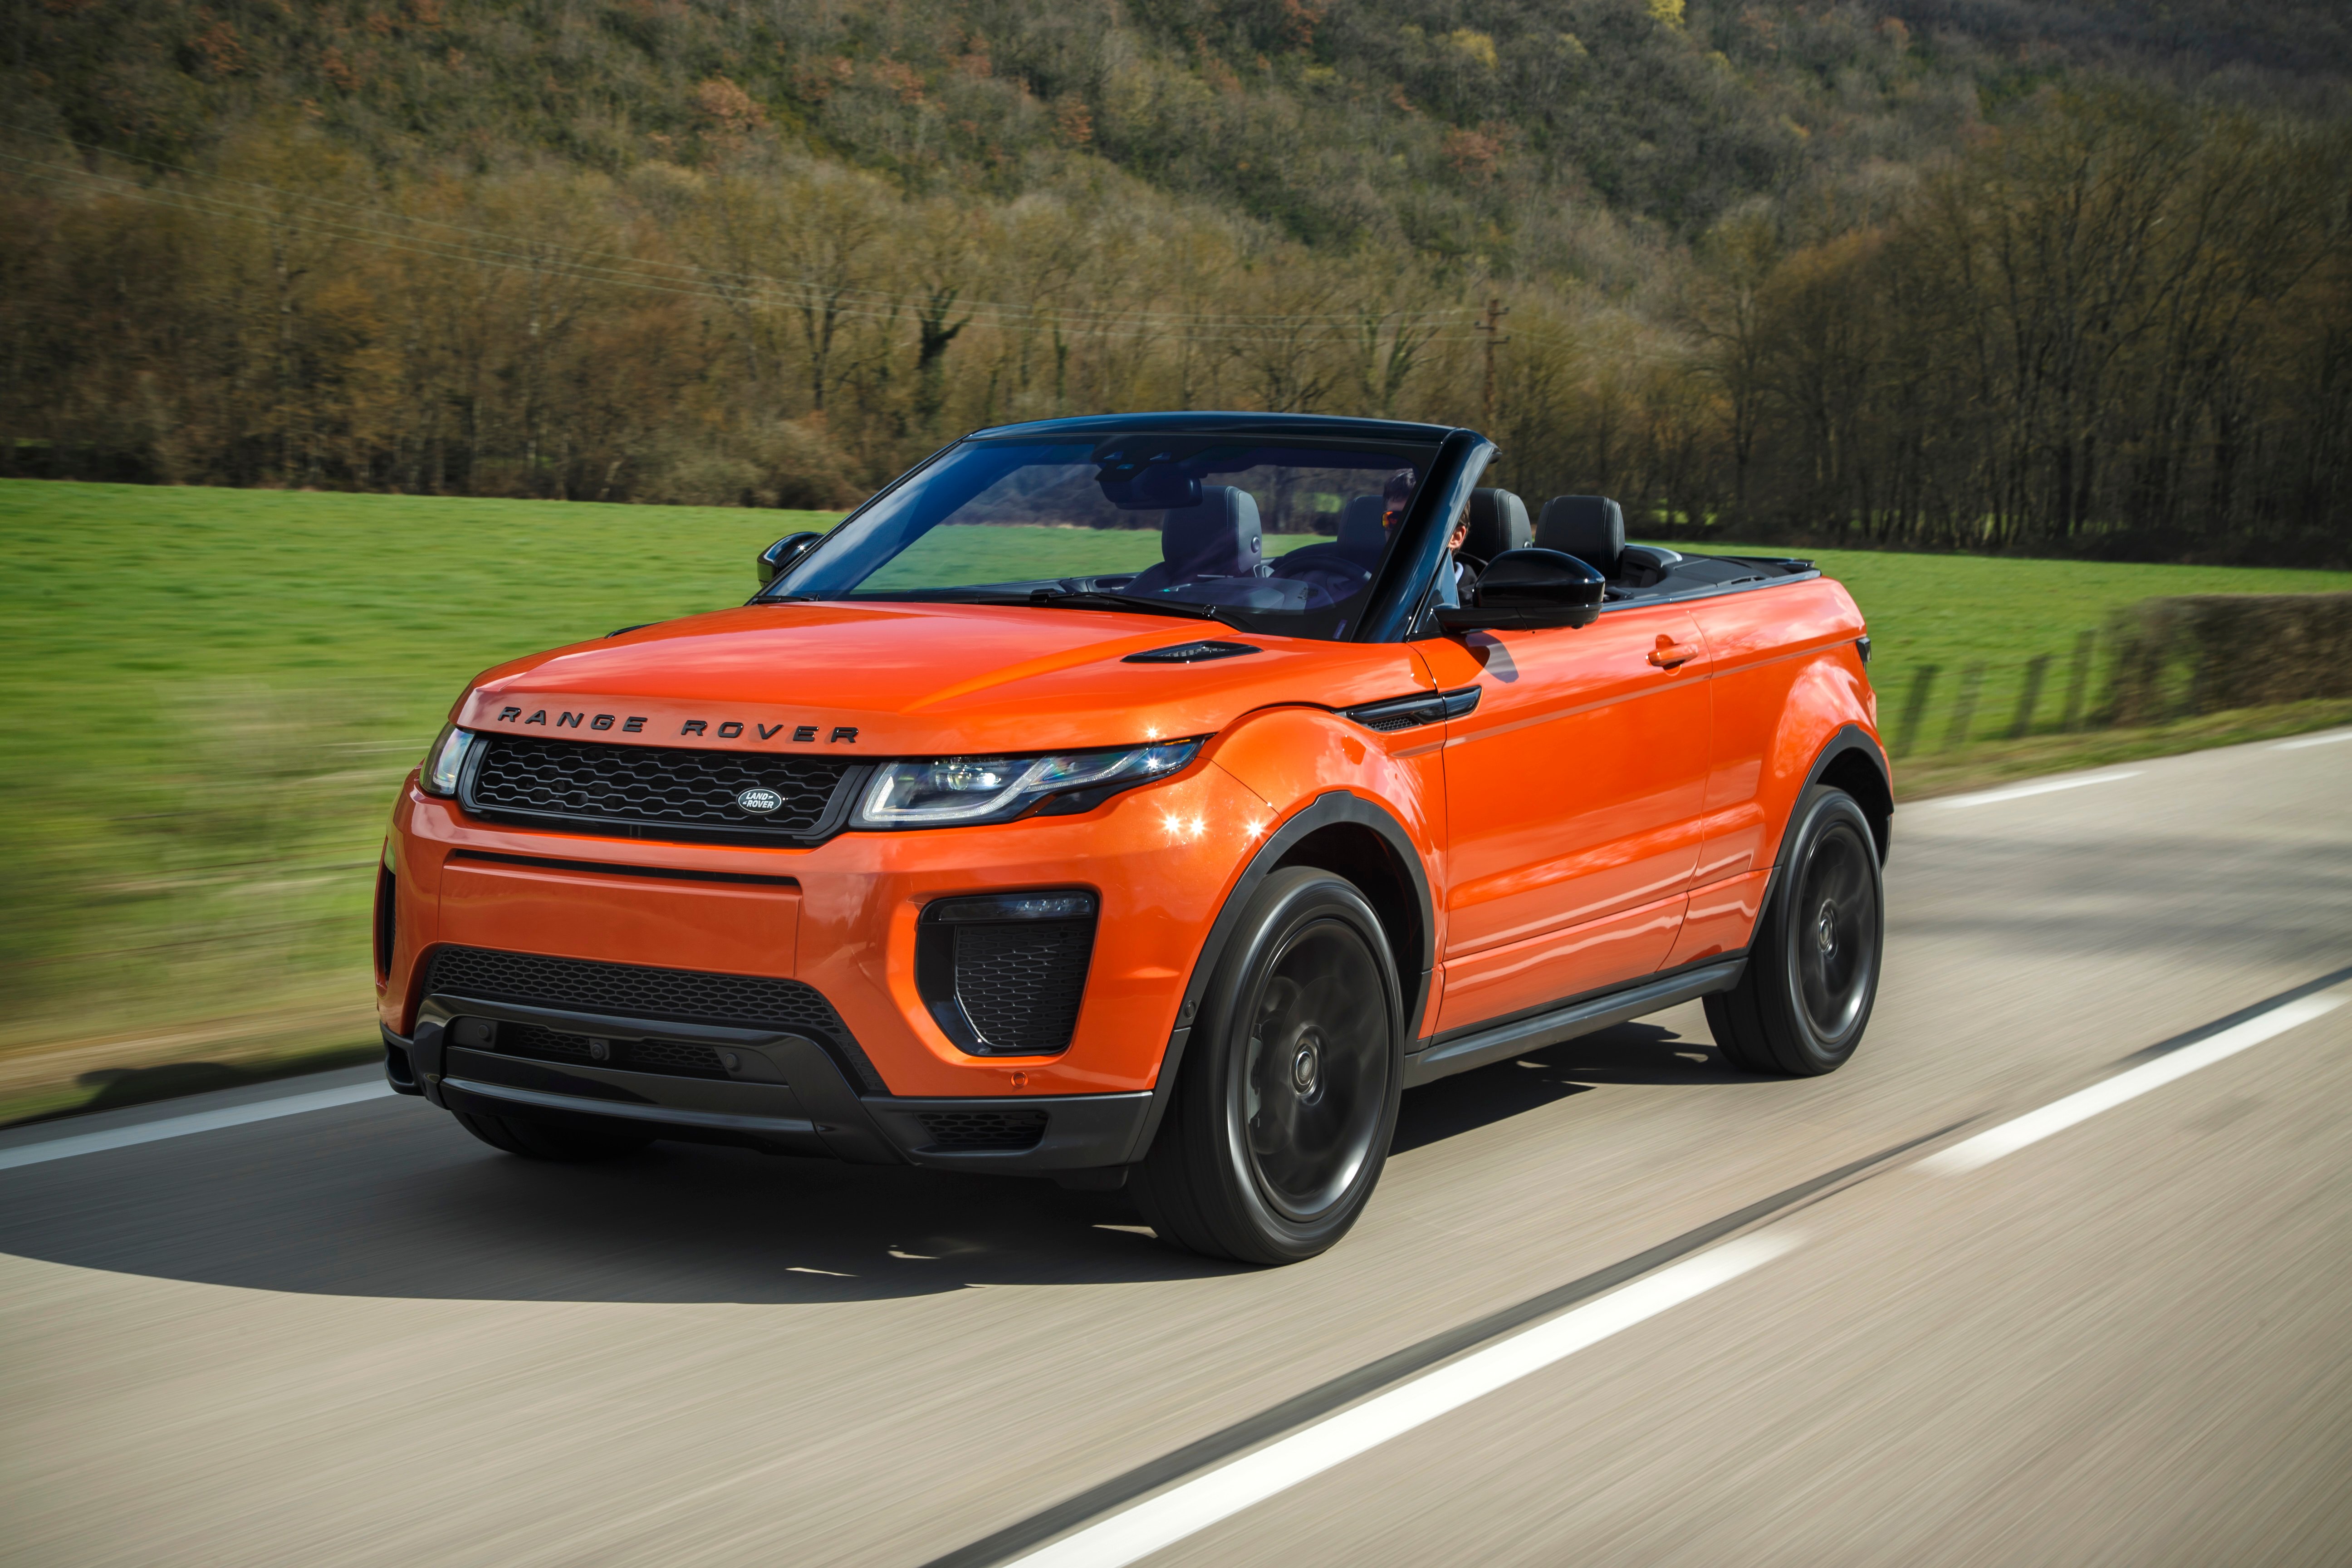 2017 Range Rover Evoque convertible pricing and specifications photos